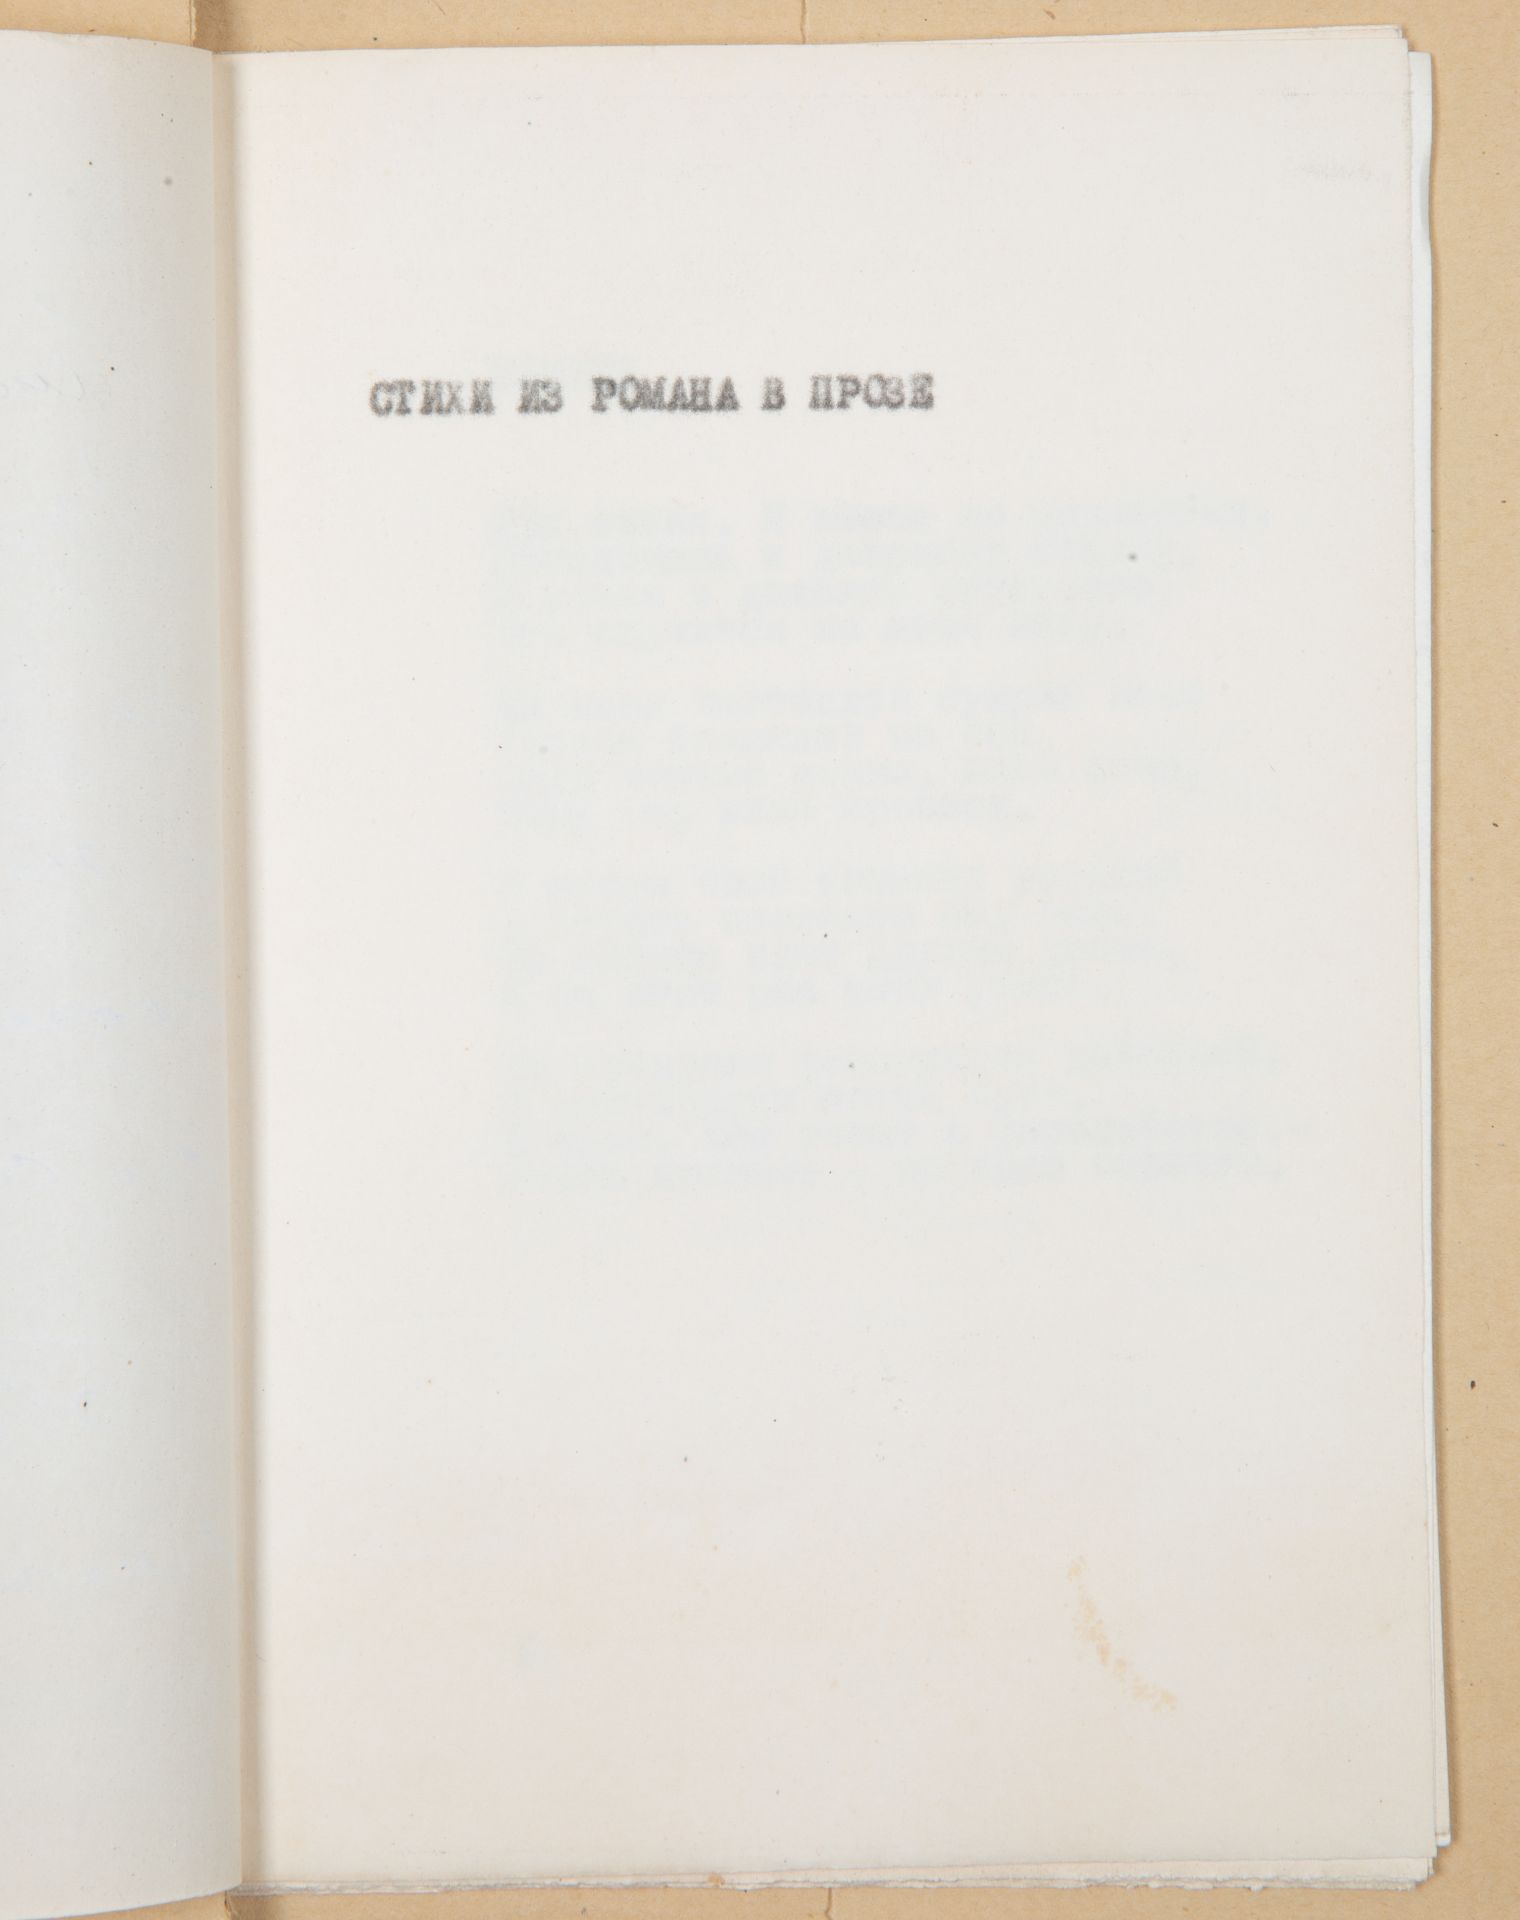 PASTERNAK, AUTOGRAPH COPY OF A MANUSCRIPT, "POEMS FROM A NOVEL IN PROSE," 1948 - Image 2 of 4